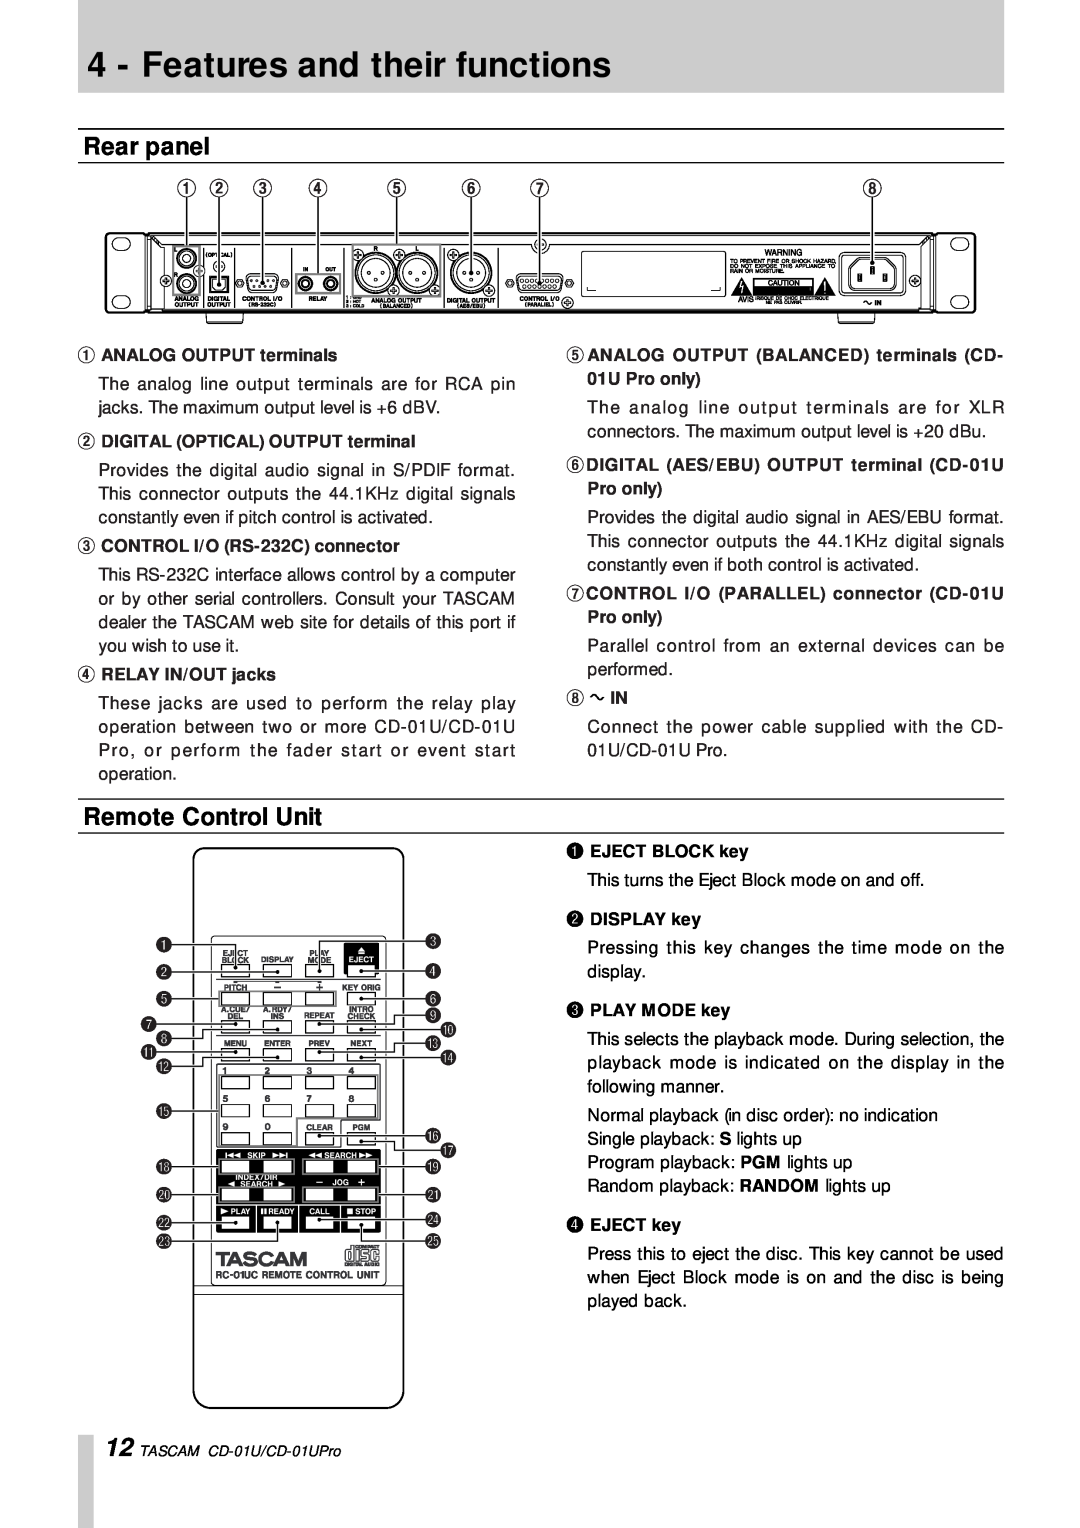 Tascam CD-01 U, CD-01UPro owner manual Rear panel, Remote Control Unit, Features and their functions 